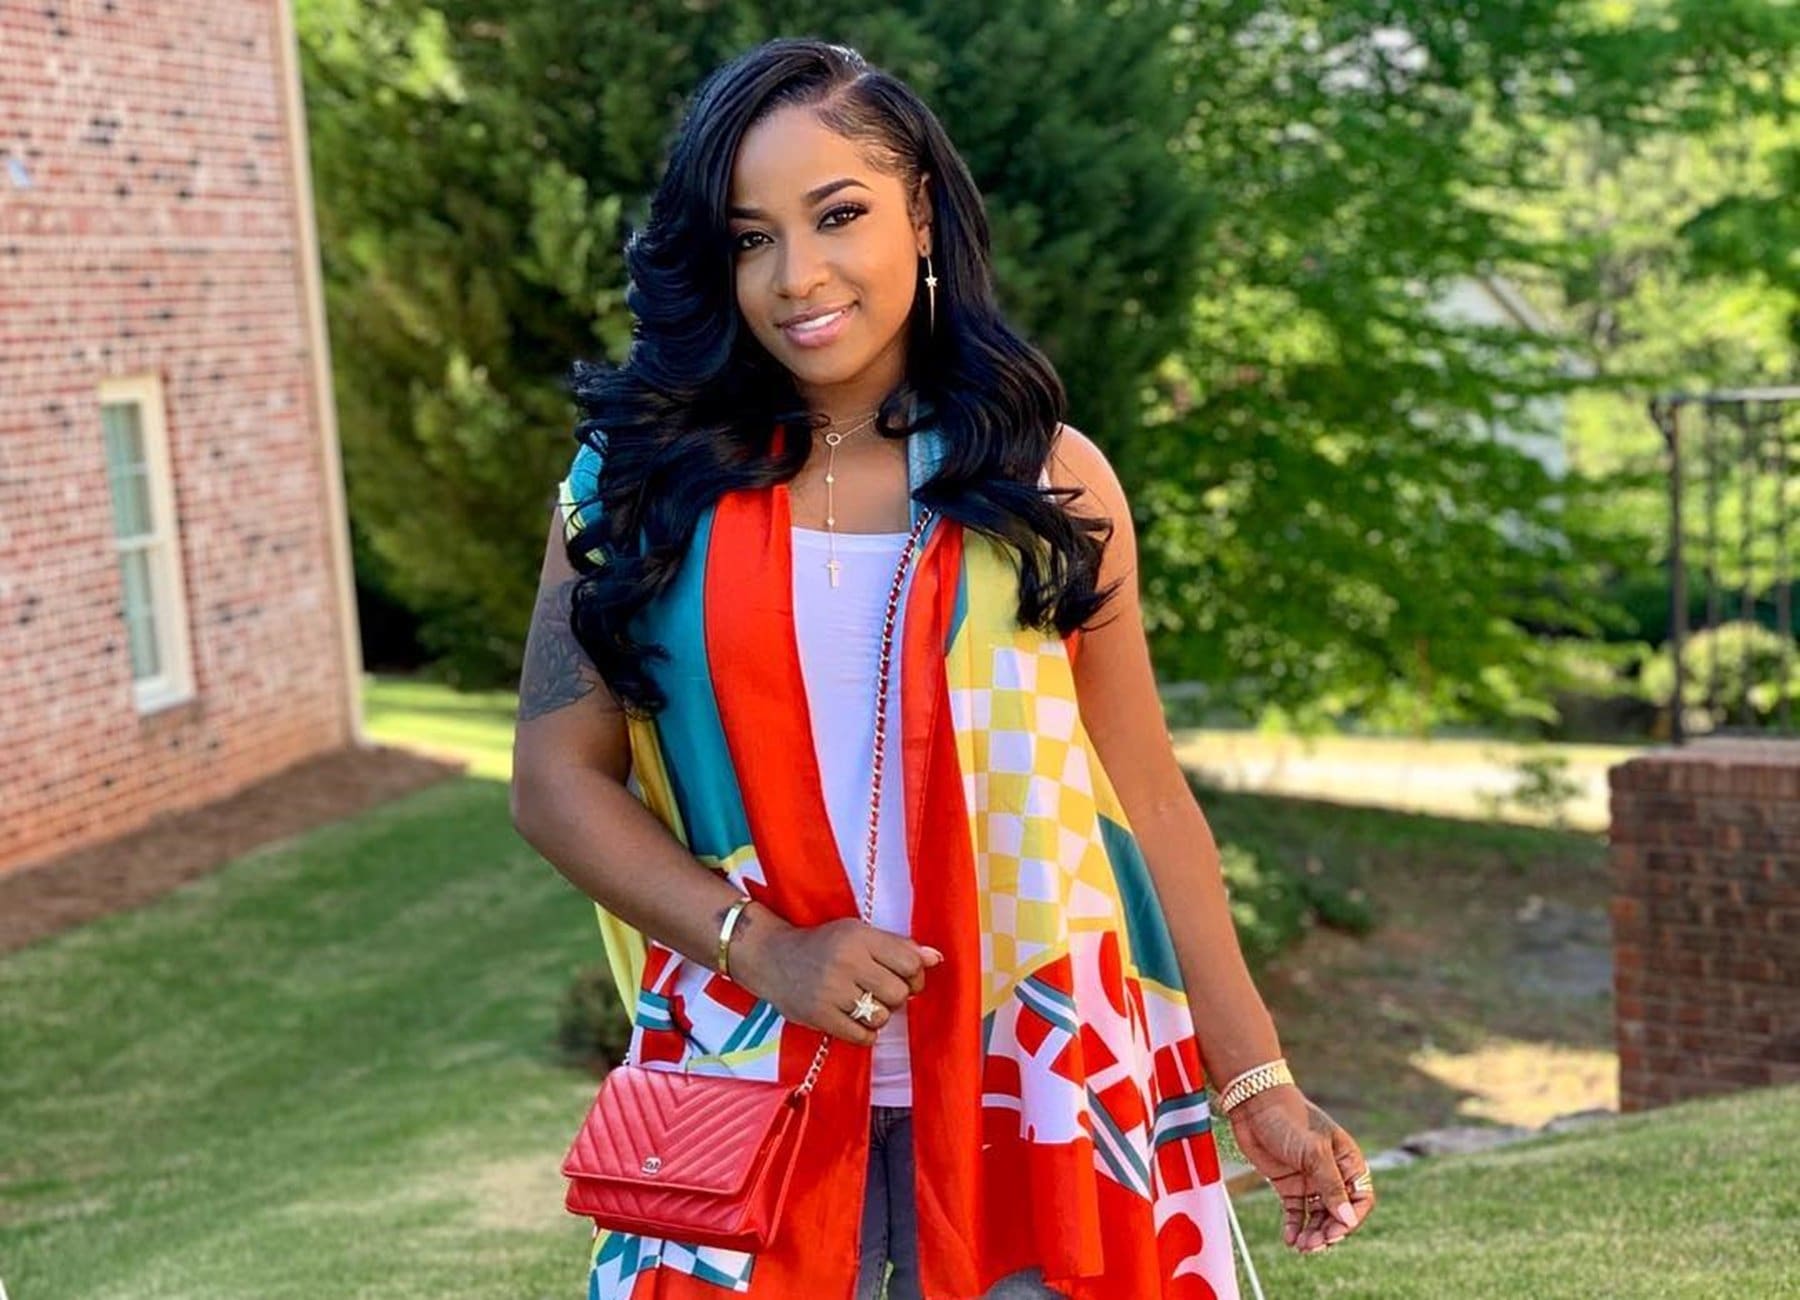 Toya Johnson Celebrates The Birthday Of Her Sister And Declares Her Love For Beedy - Read Her Message Here